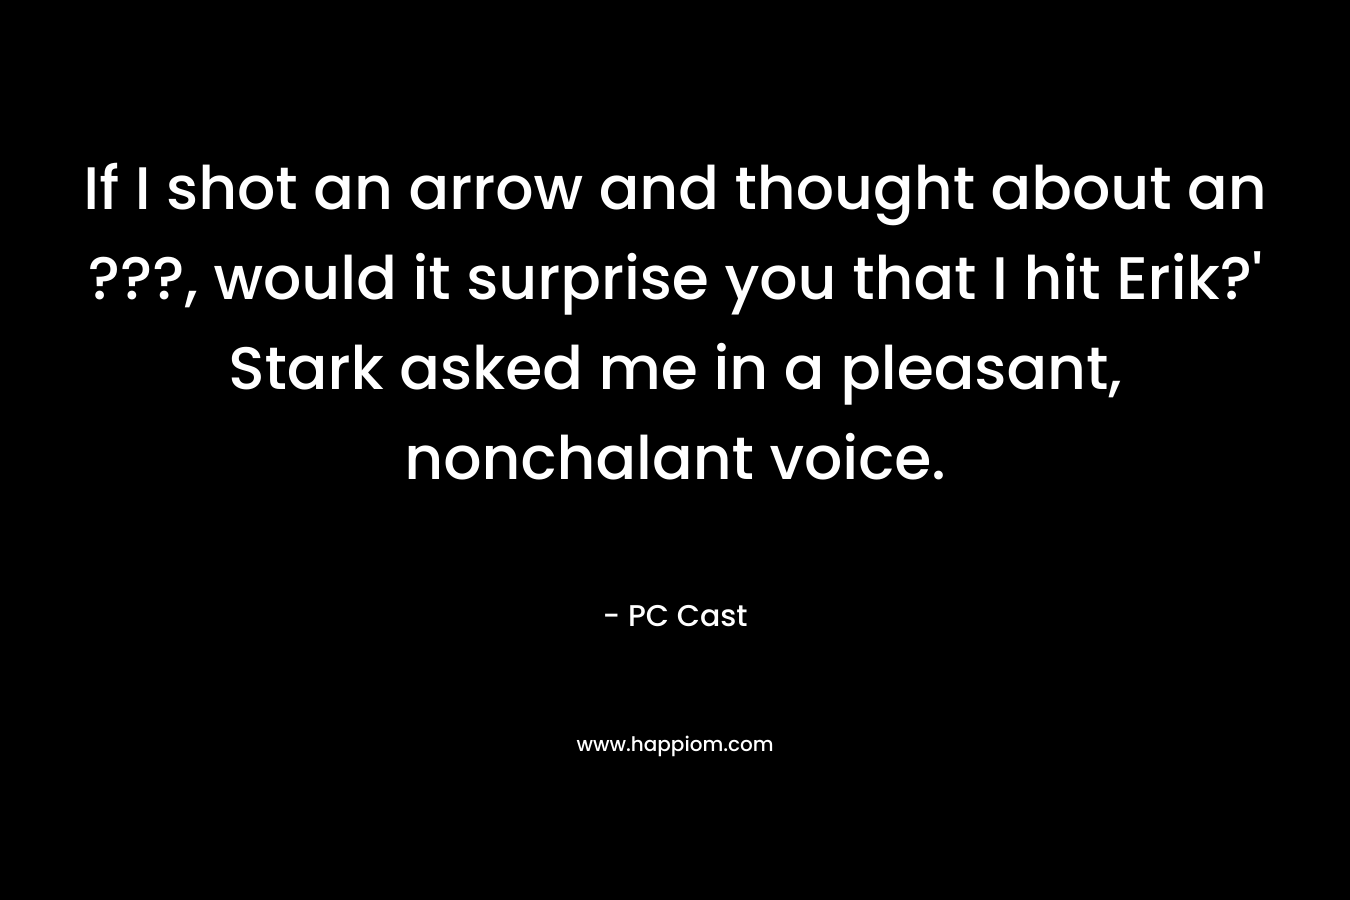 If I shot an arrow and thought about an ???, would it surprise you that I hit Erik?' Stark asked me in a pleasant, nonchalant voice.